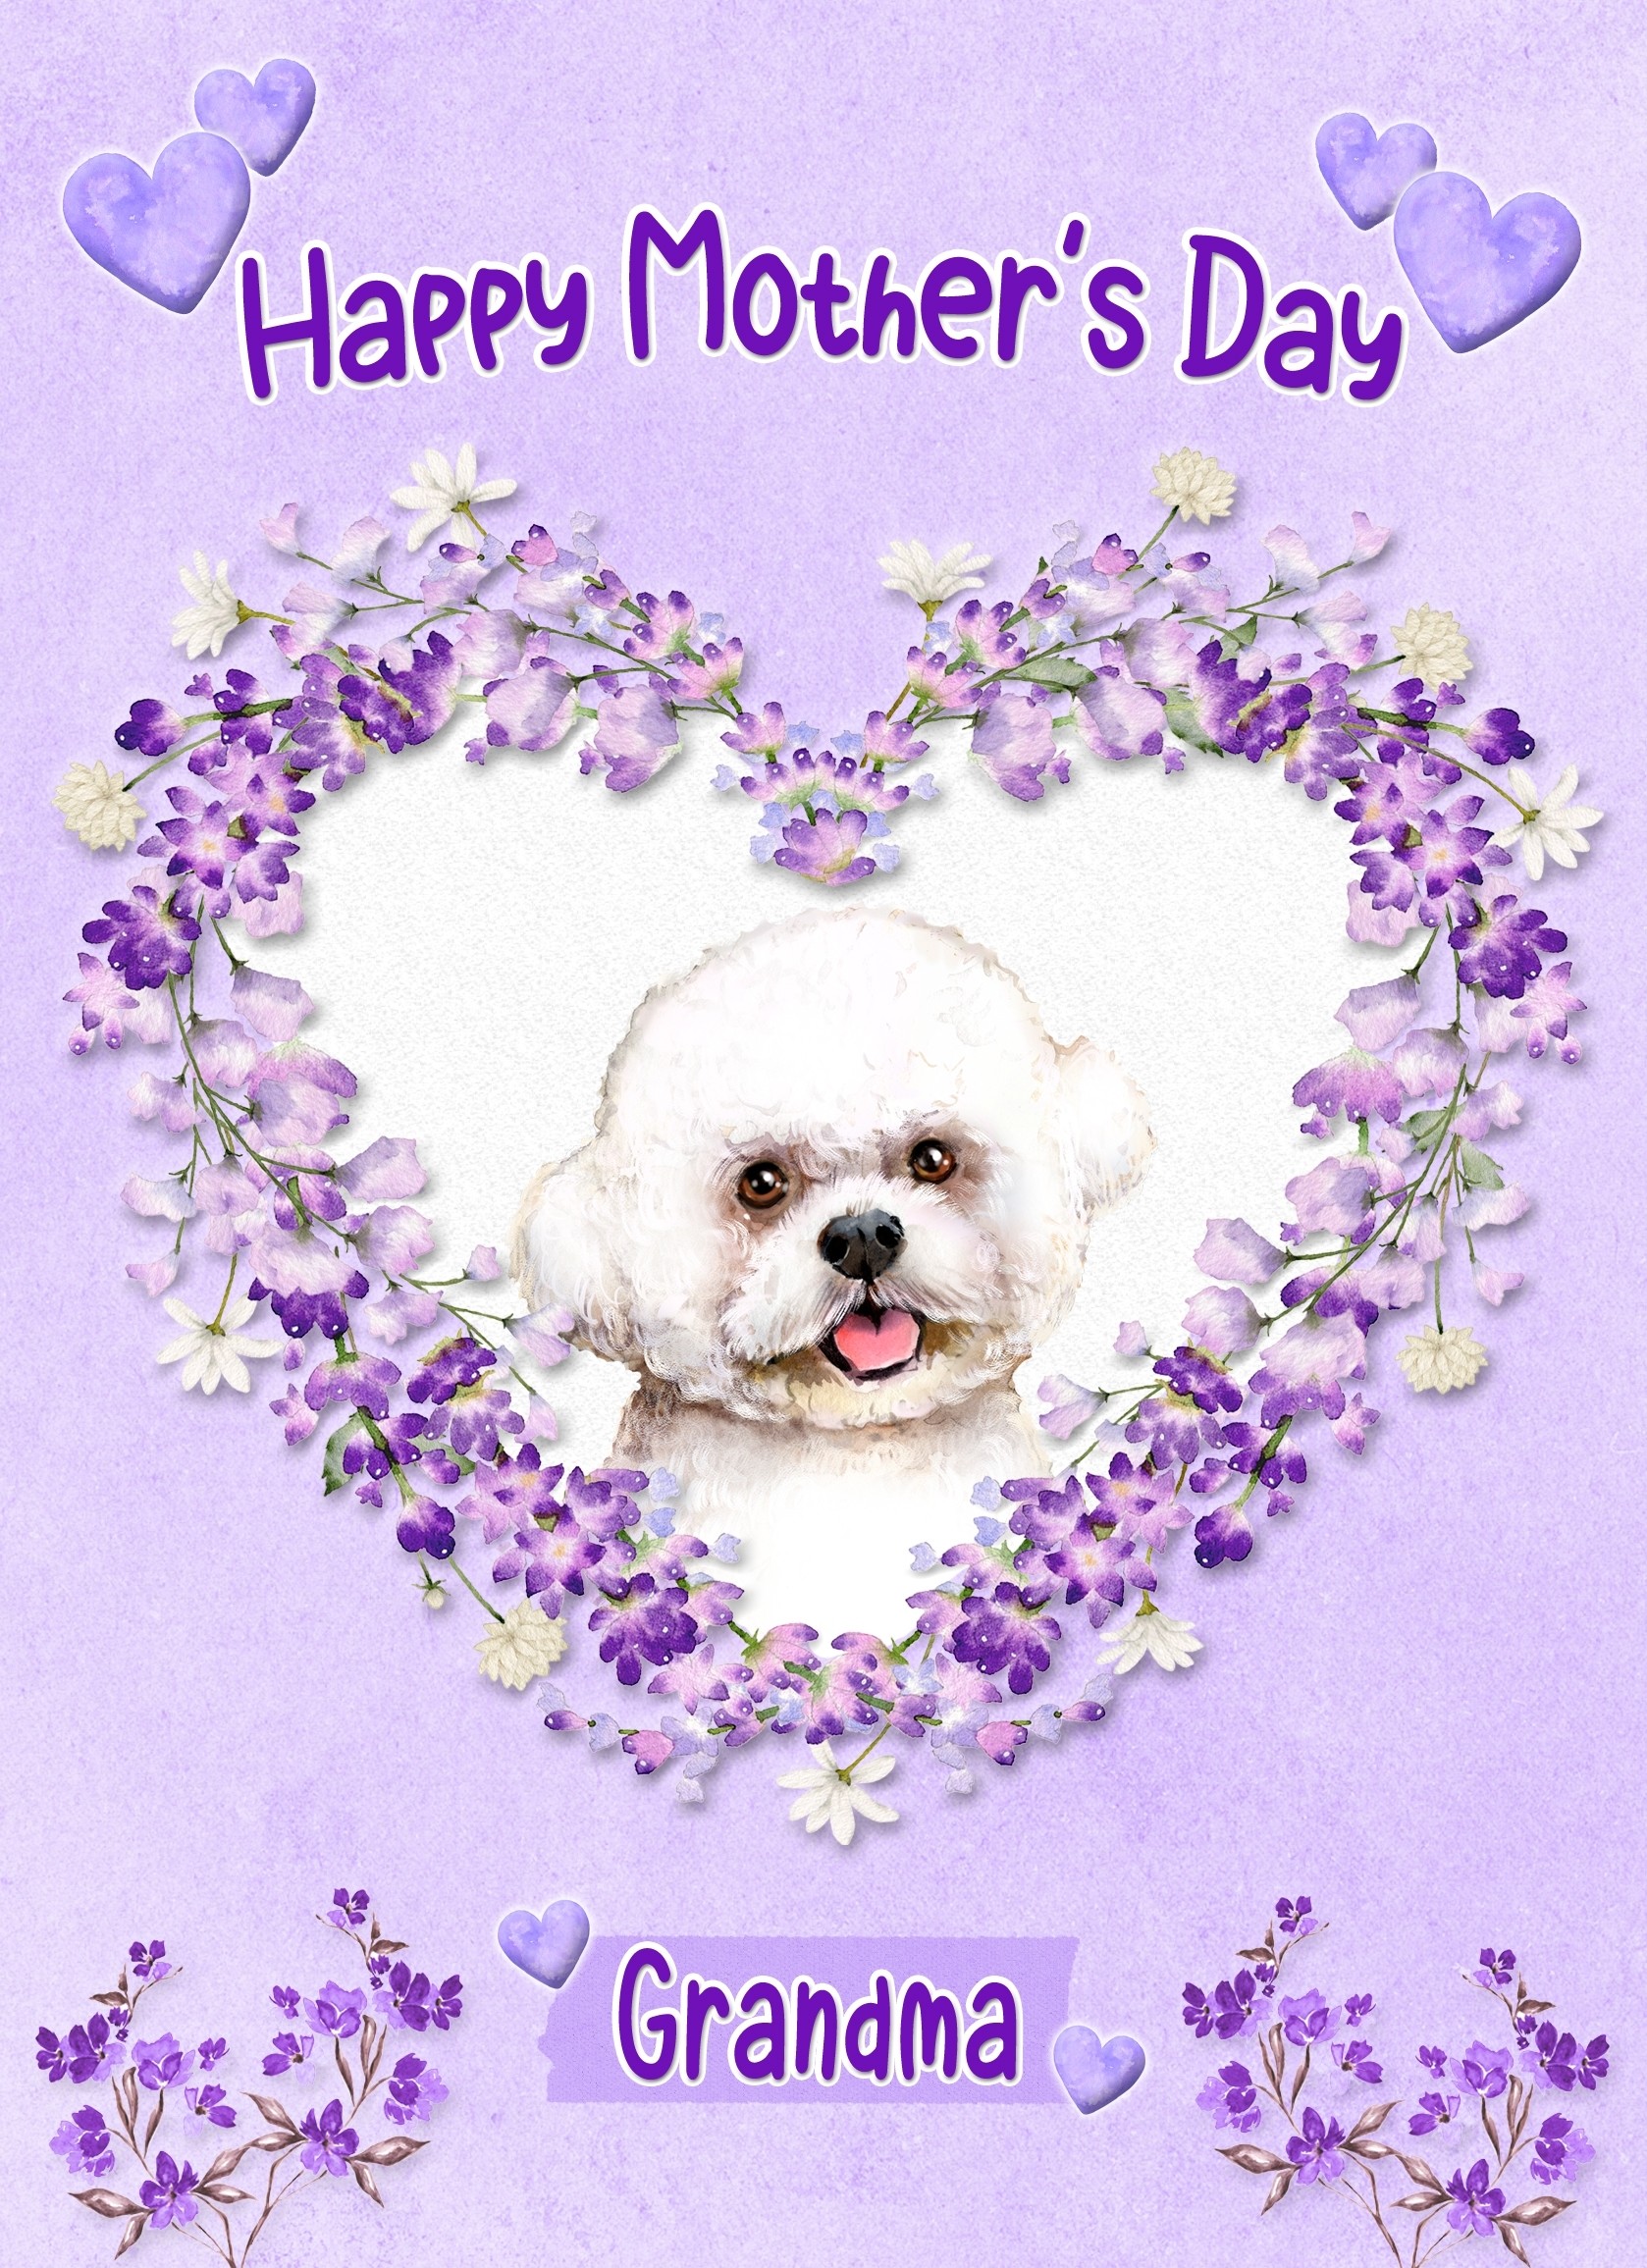 Bichon Frise Dog Mothers Day Card (Happy Mothers, Grandma)